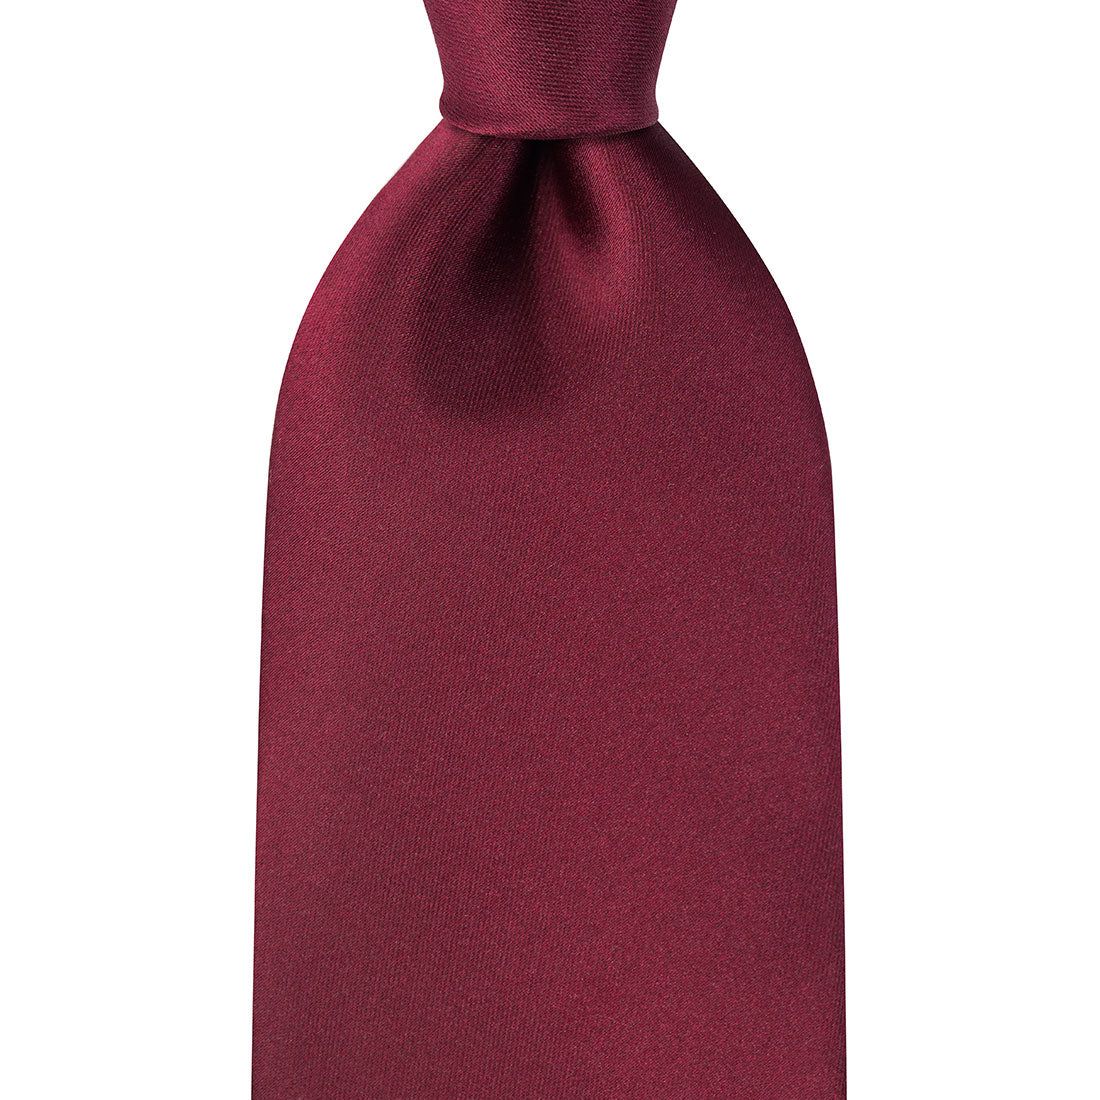 Burgundy and Red Geometric 'Post Ranch' Silk Estate Tie by Robert